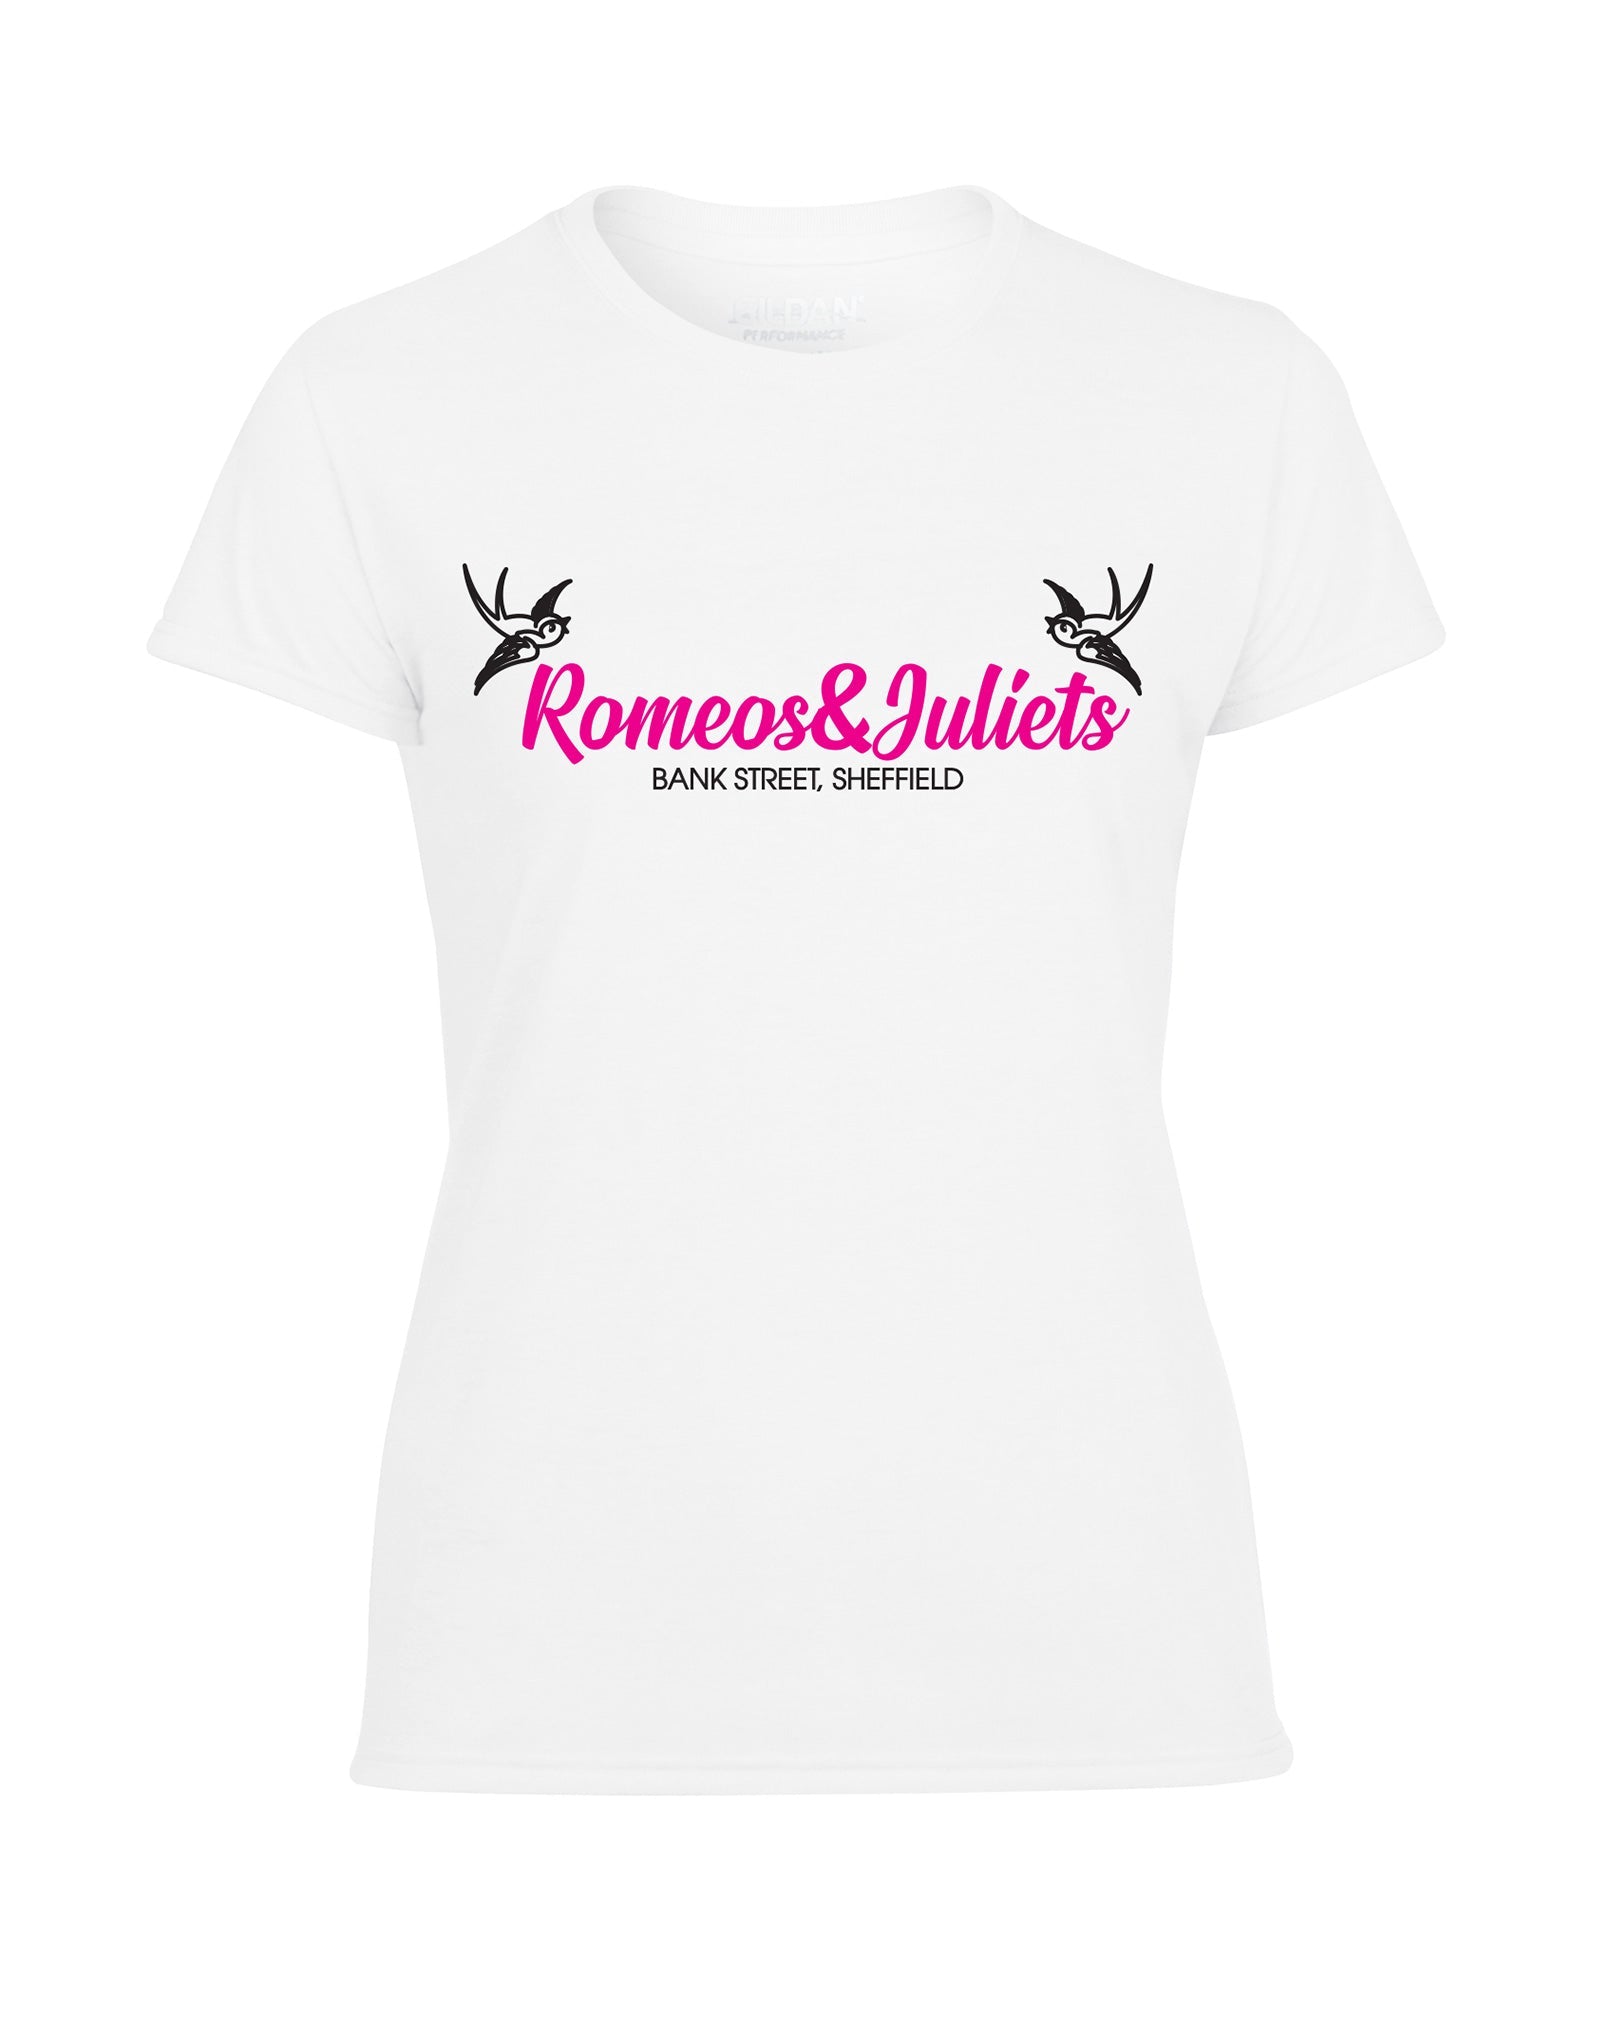 Romeos & Juliets ladies fit t-shirt- various colours - Dirty Stop Outs